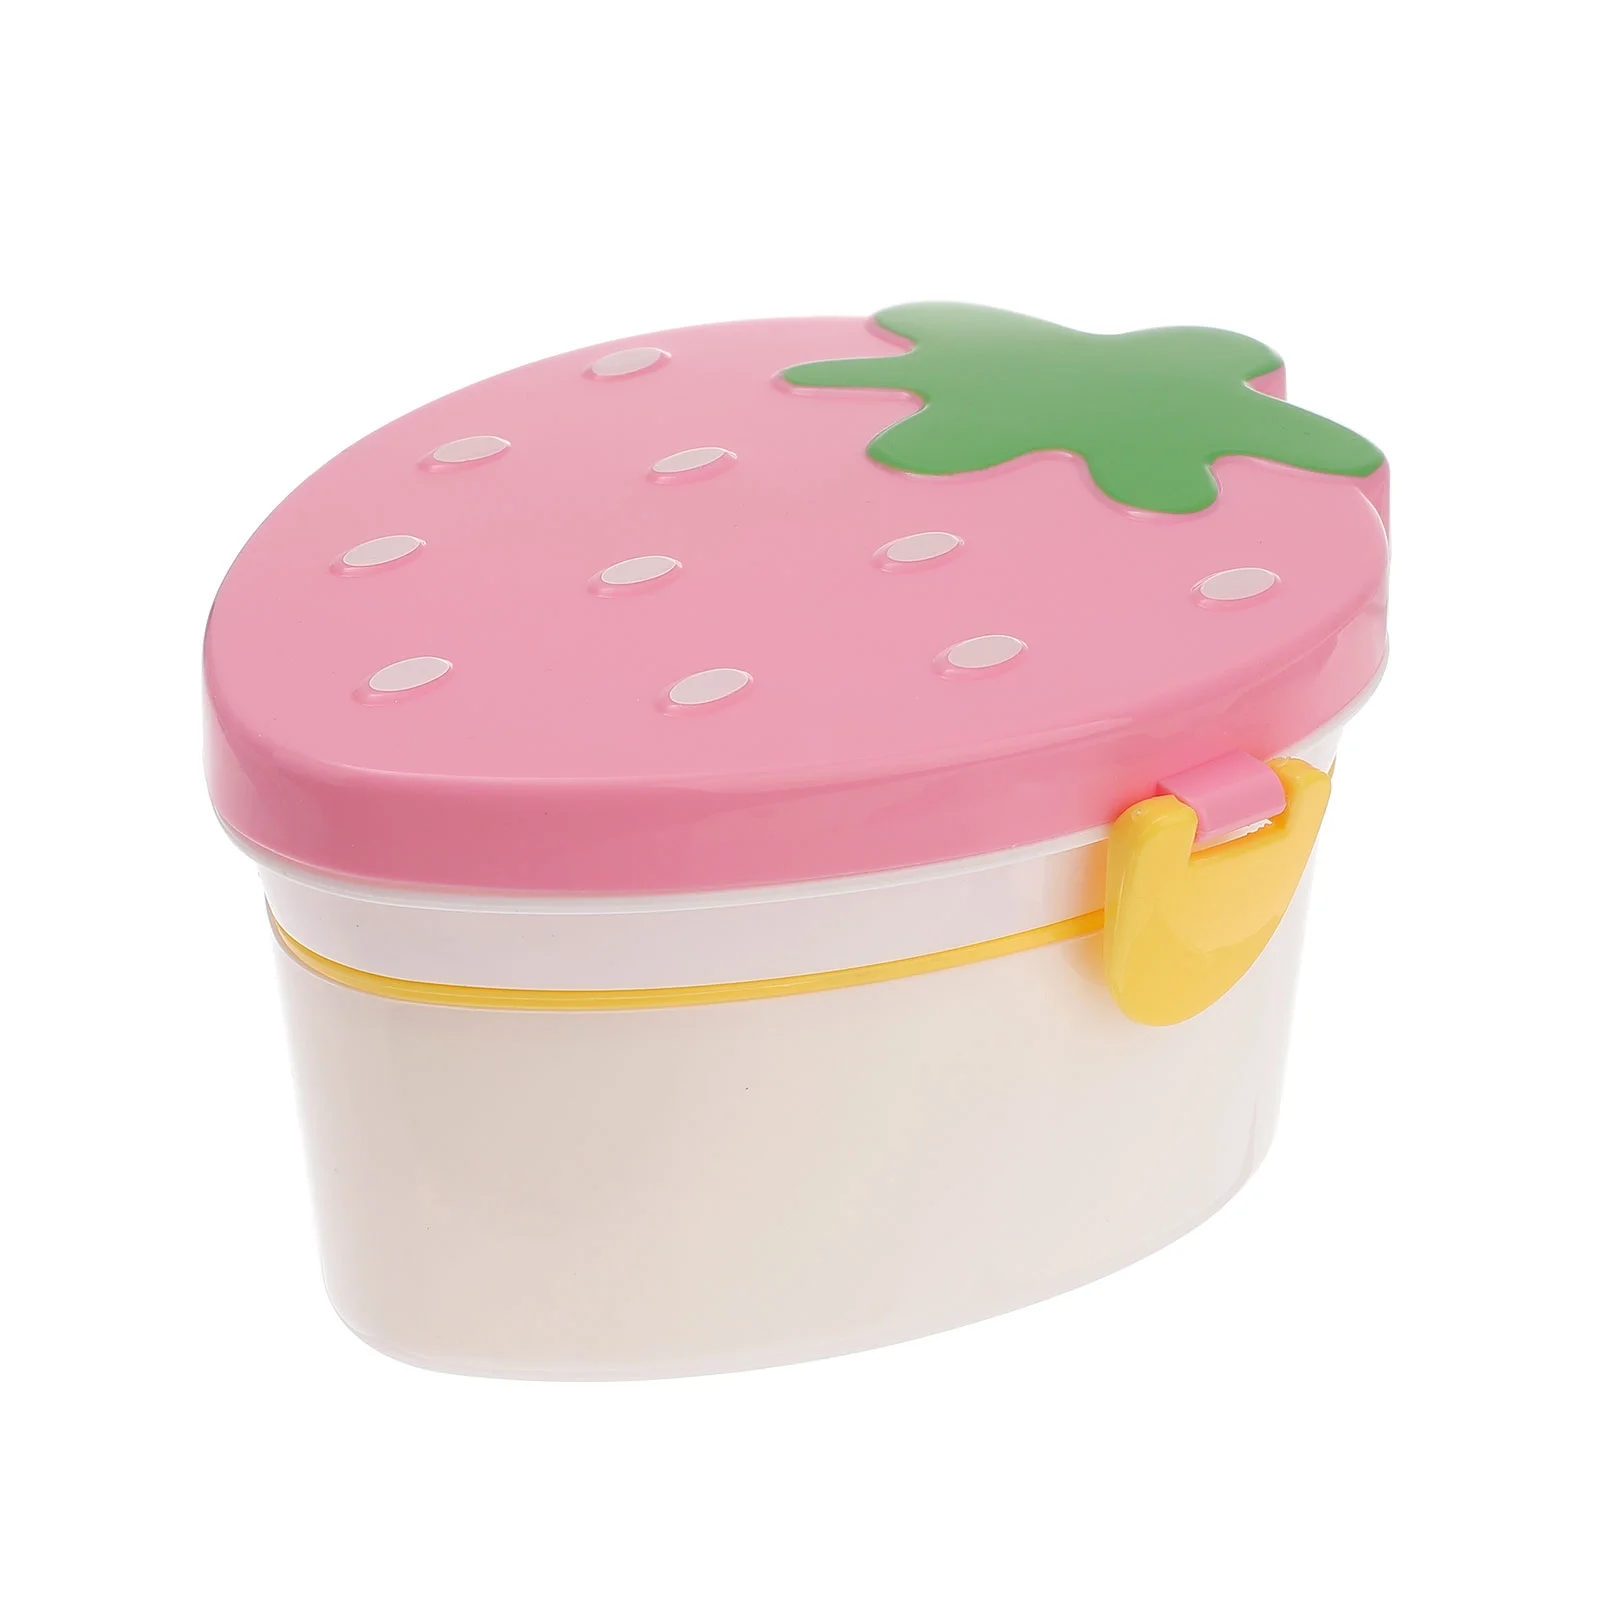 

Box Lunch Bento Kids Container Containersplastic Foodstackable Tier Insulation Sandwich Layer Double Compartment Layers Meal